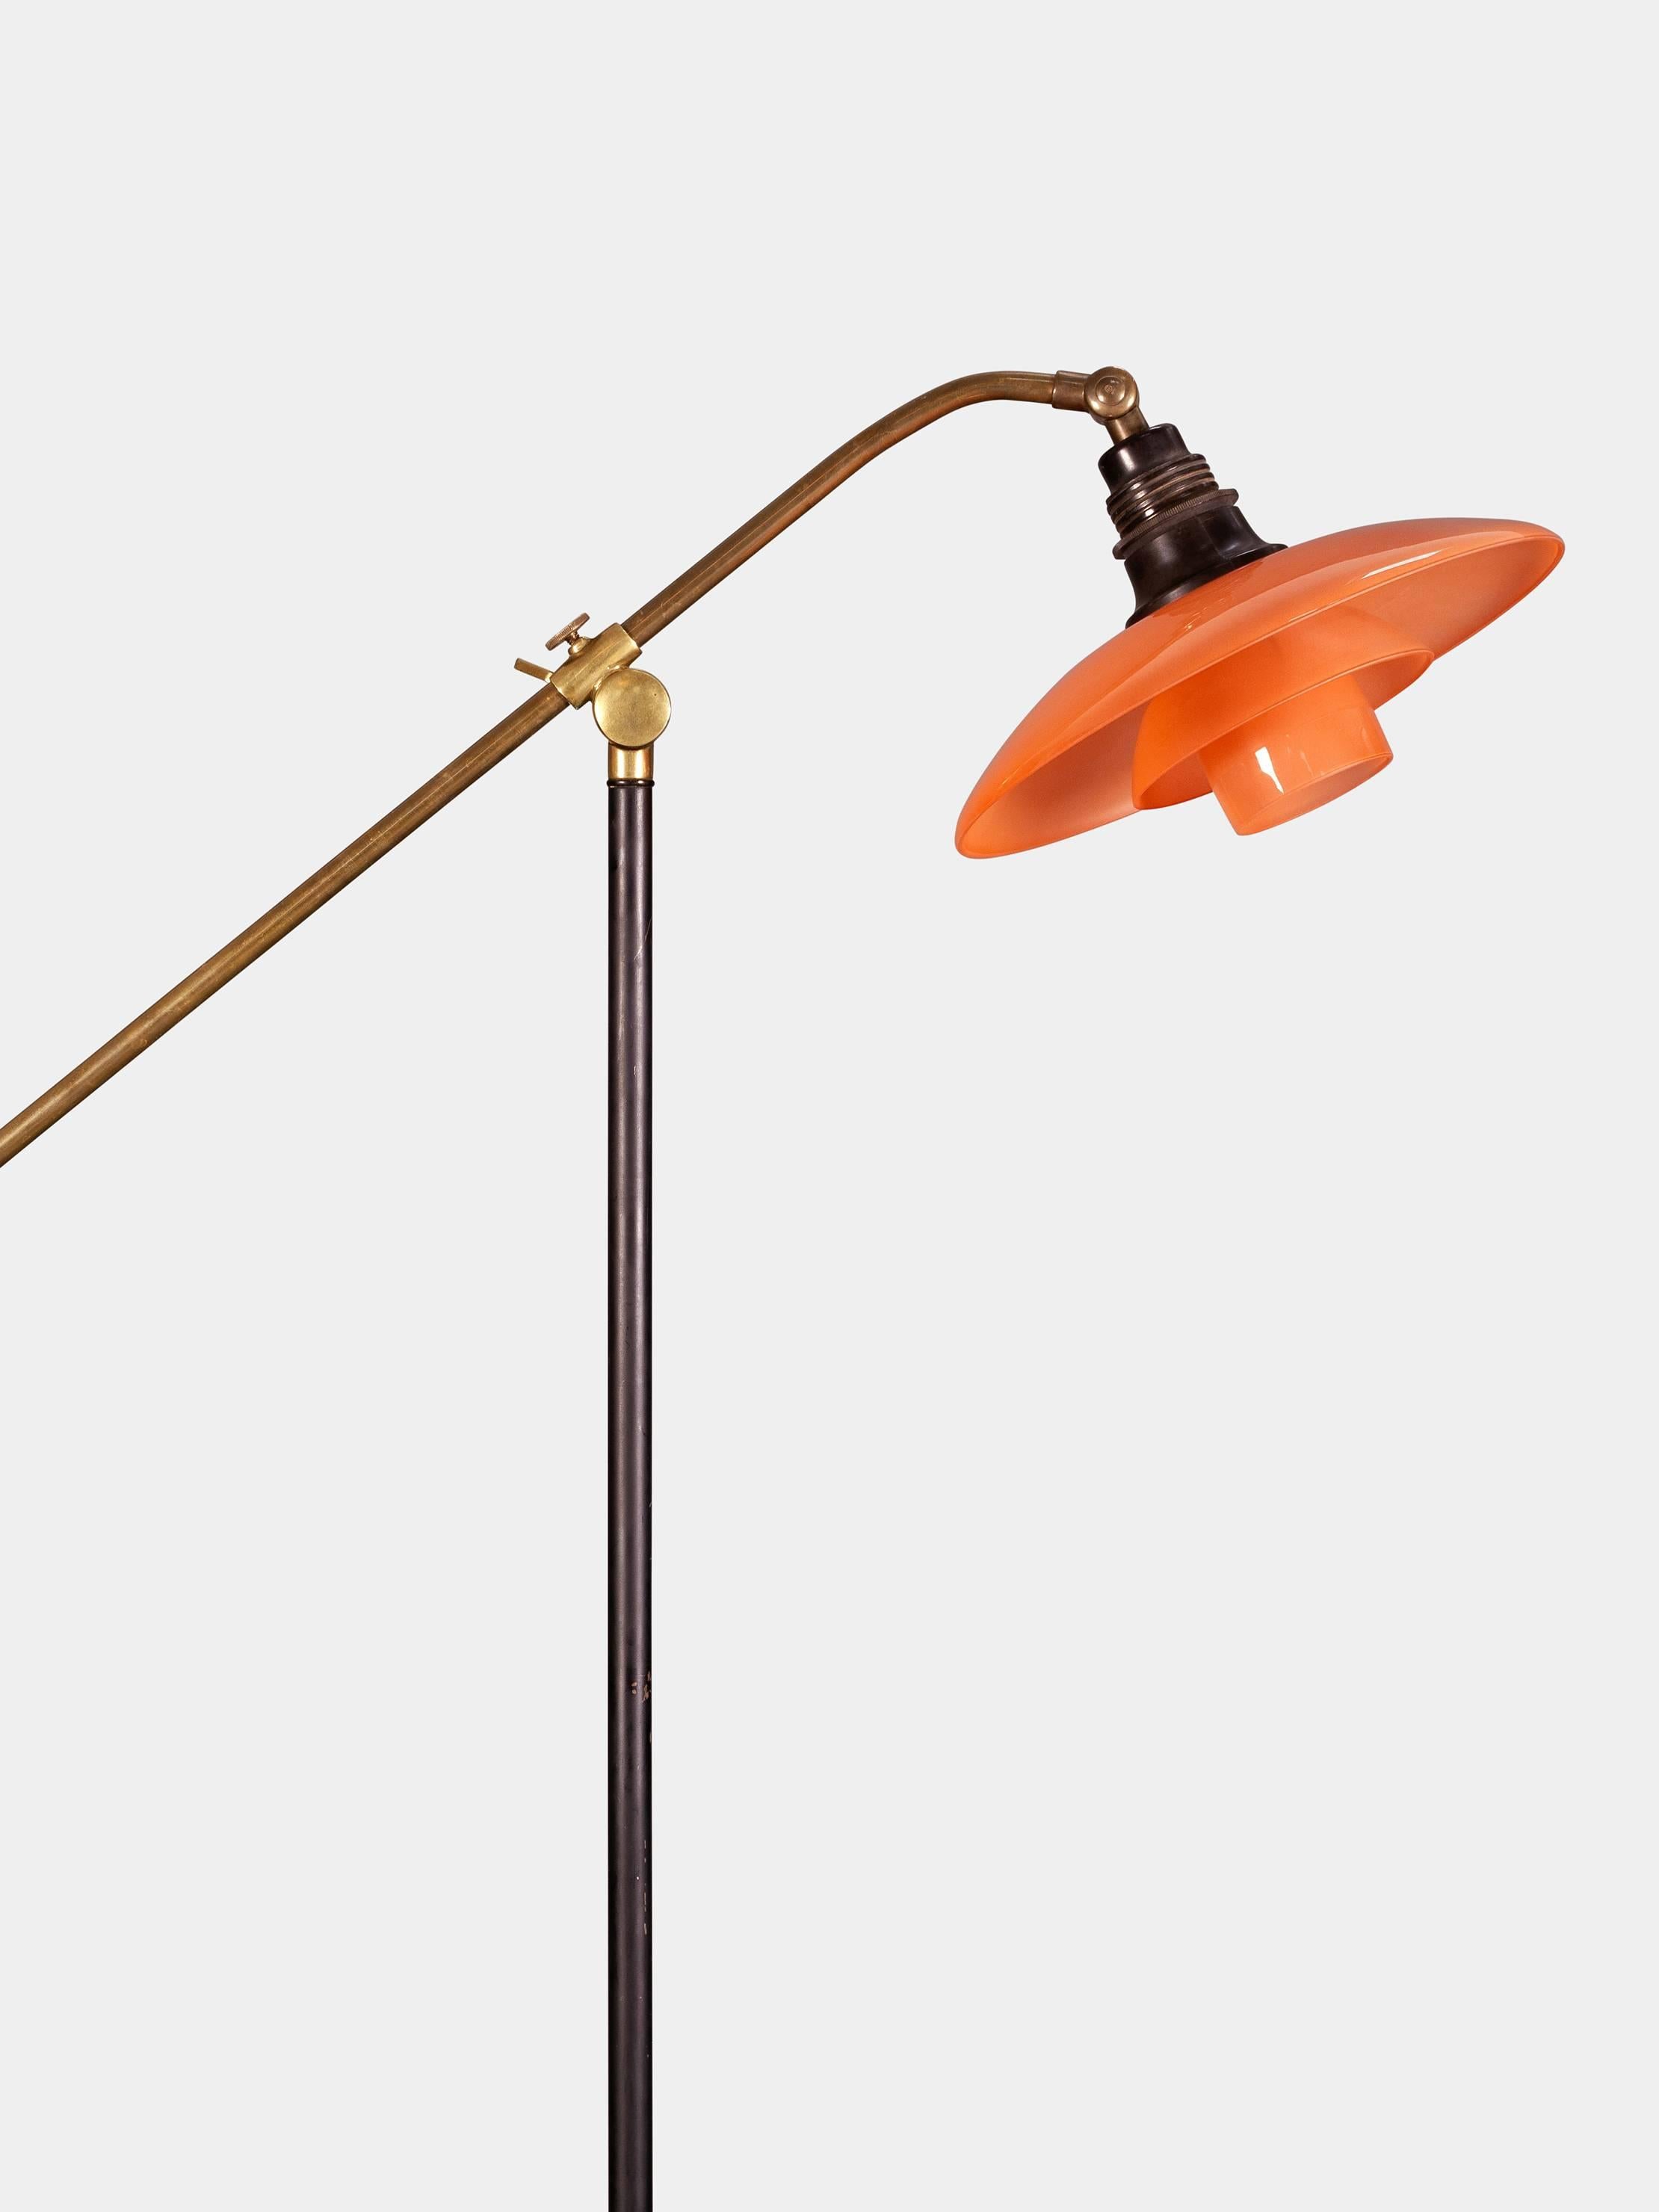 Poul Henningsen, PH 2/2 so-called `Water Pump´ floor lamp.
beautifully decorated in black lacquered steel stand with brushed brass arm and shade set of frosted shades, painted pink. Light house and switch of bakelite.
Stamped patented.